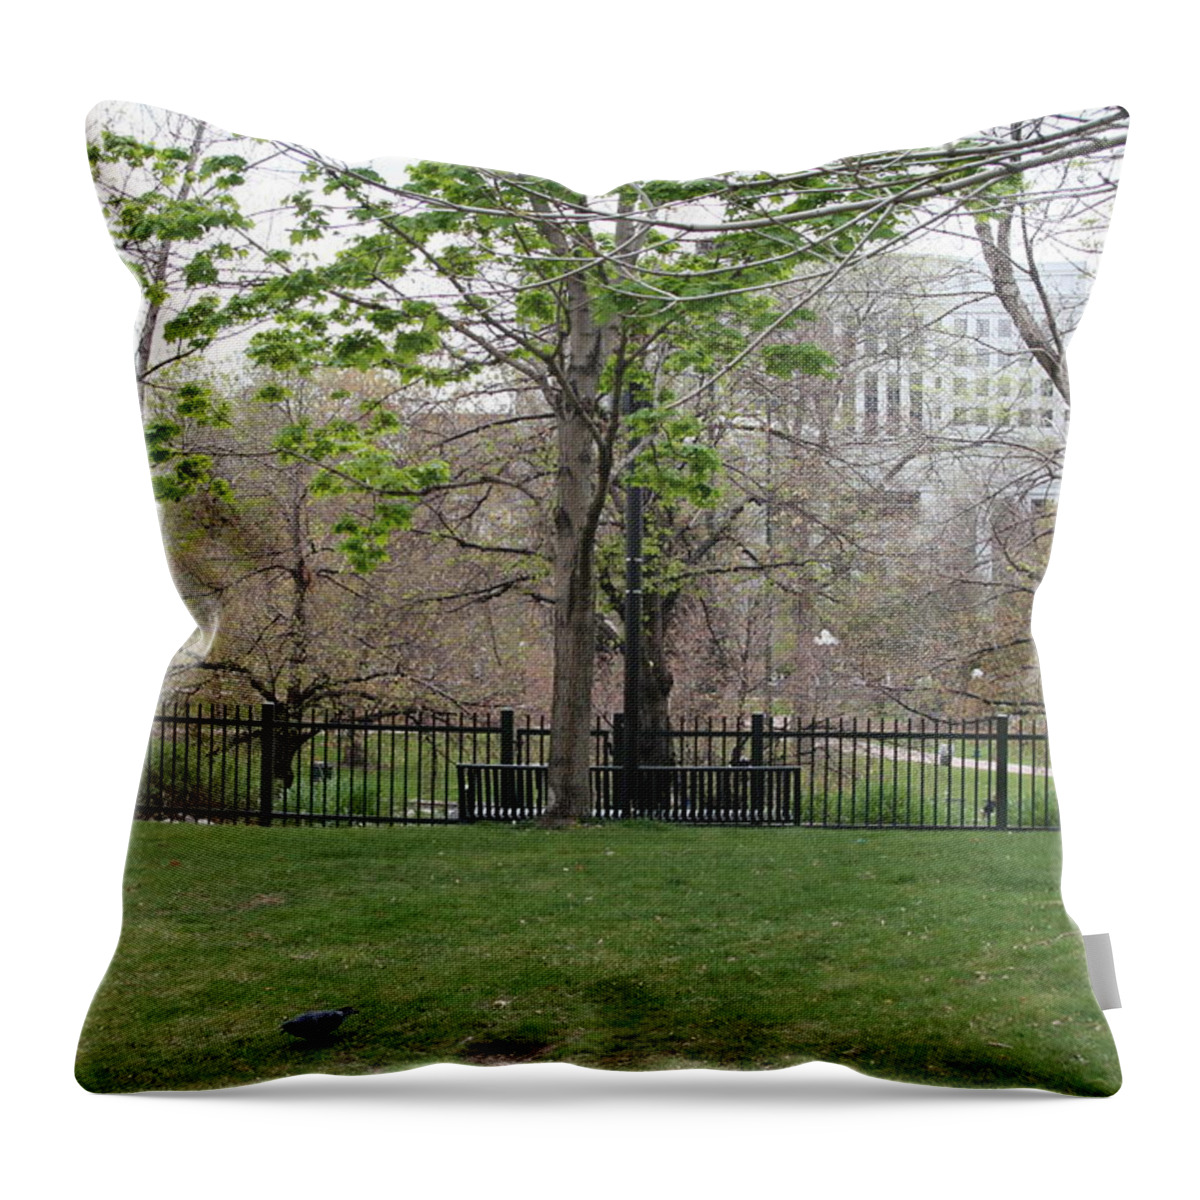 David S Reynolds Throw Pillow featuring the photograph Birds Can't Read by David S Reynolds